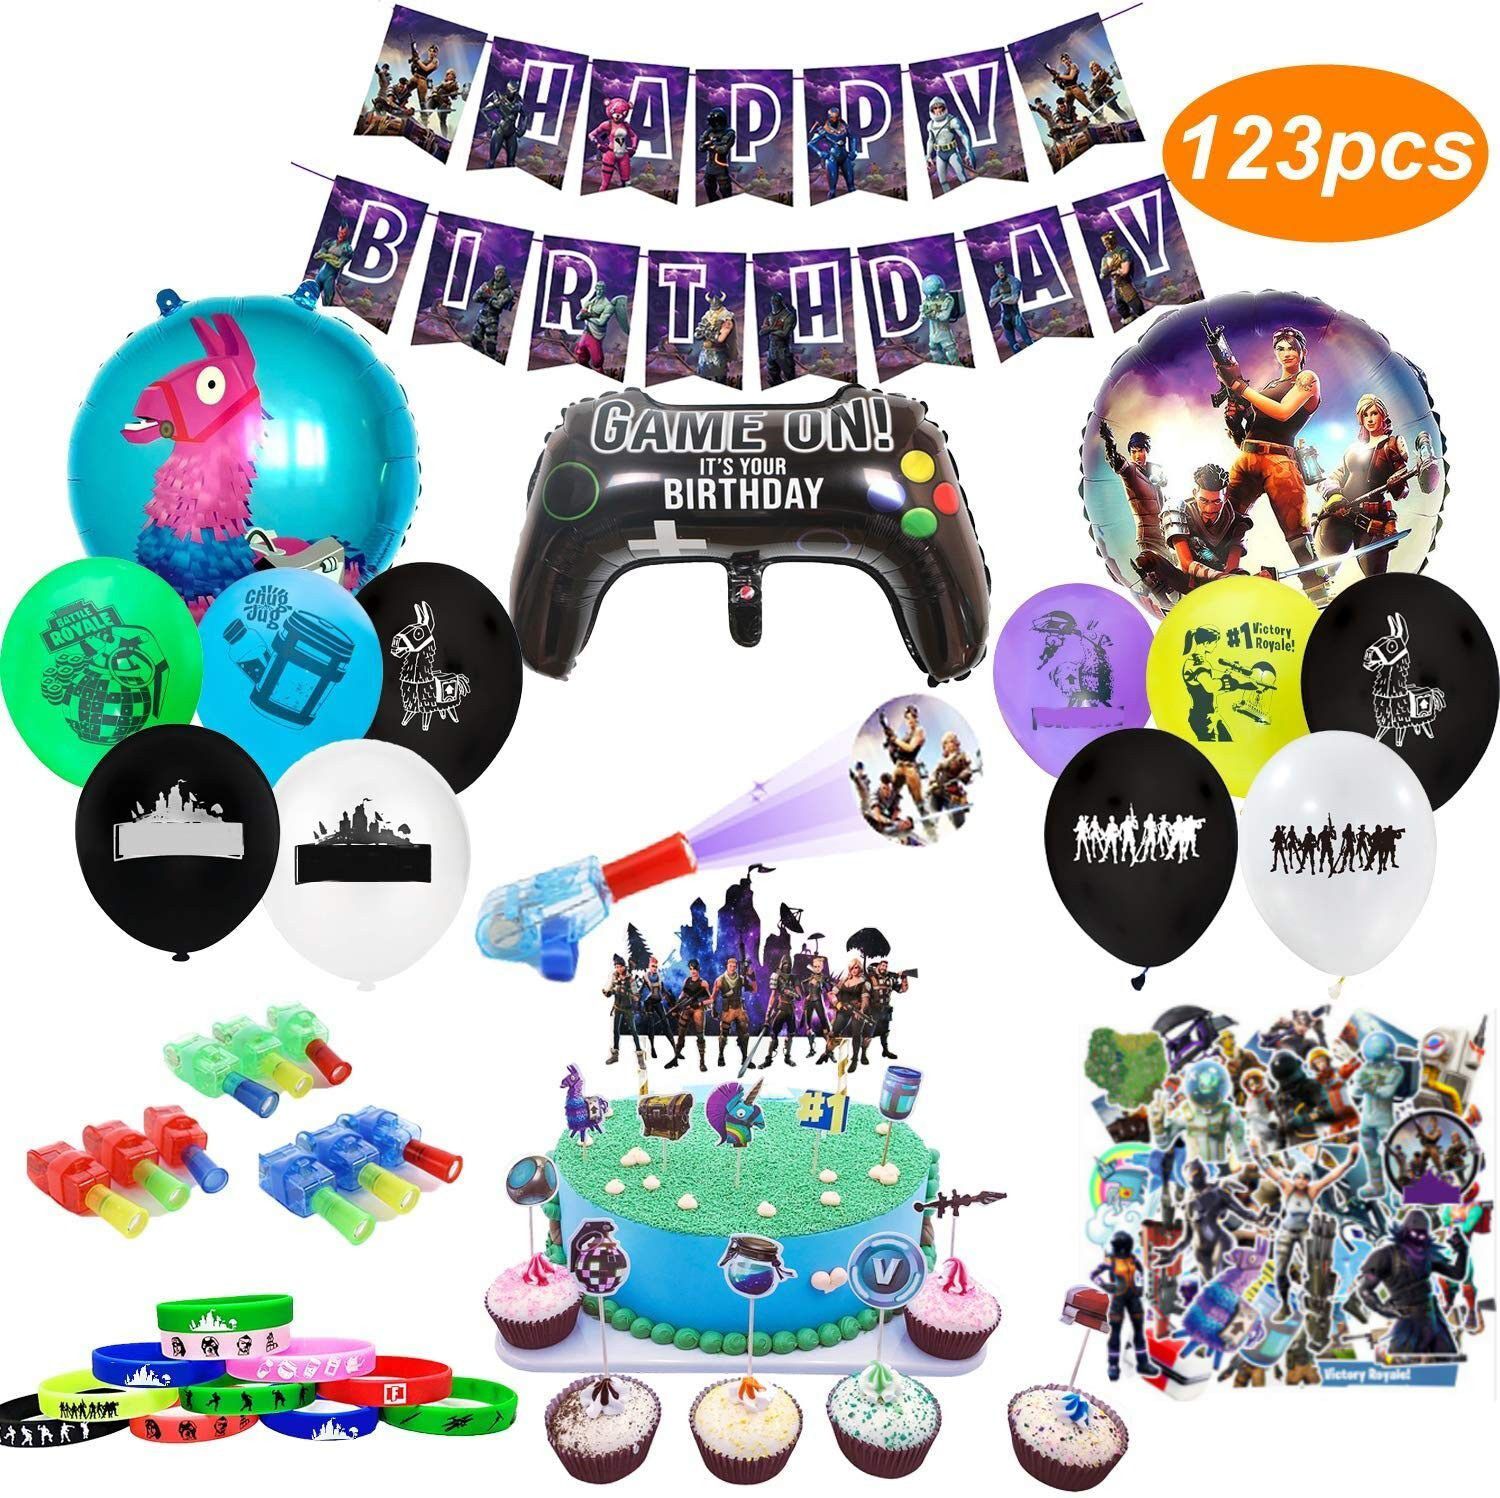 Birthday Party Supplies for Game Fans, 123pcs Gaming Theme Party Decorations